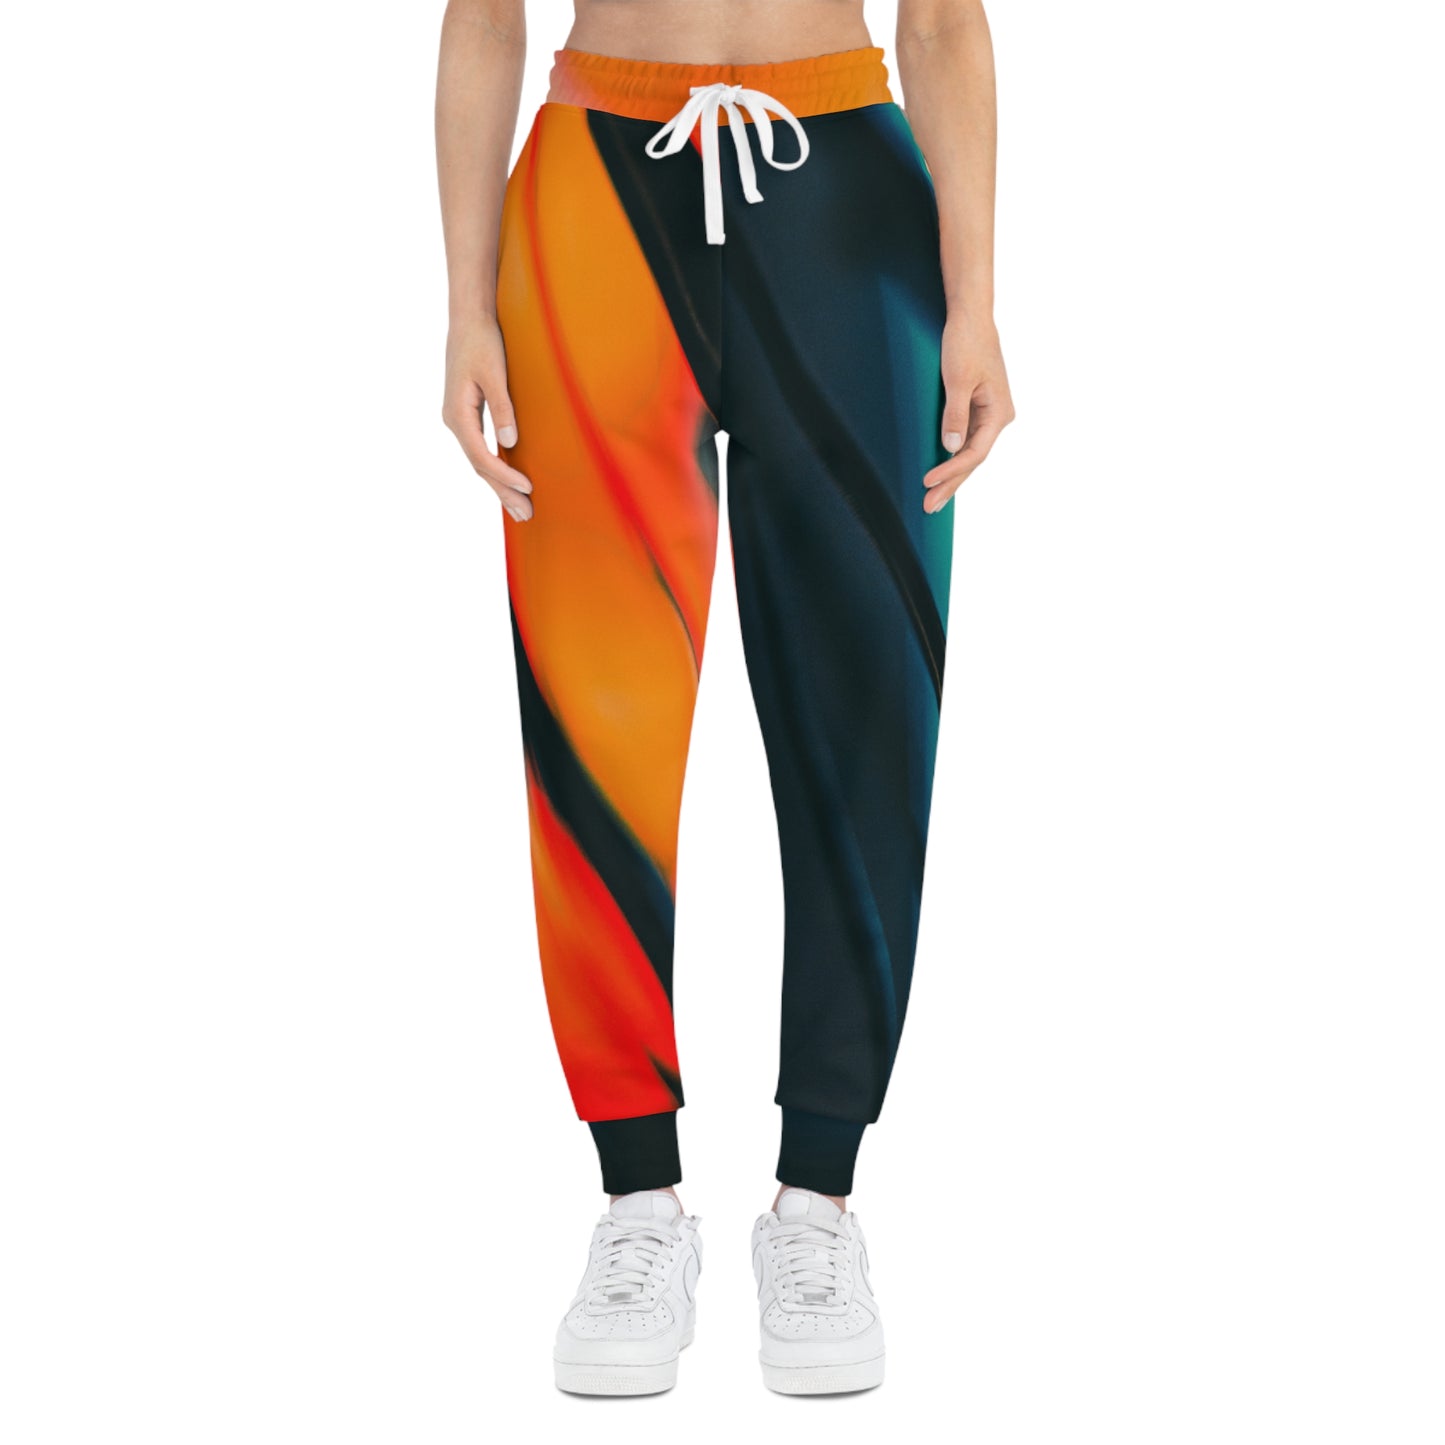 Athletic Joggers For Women | Ribooa Mix